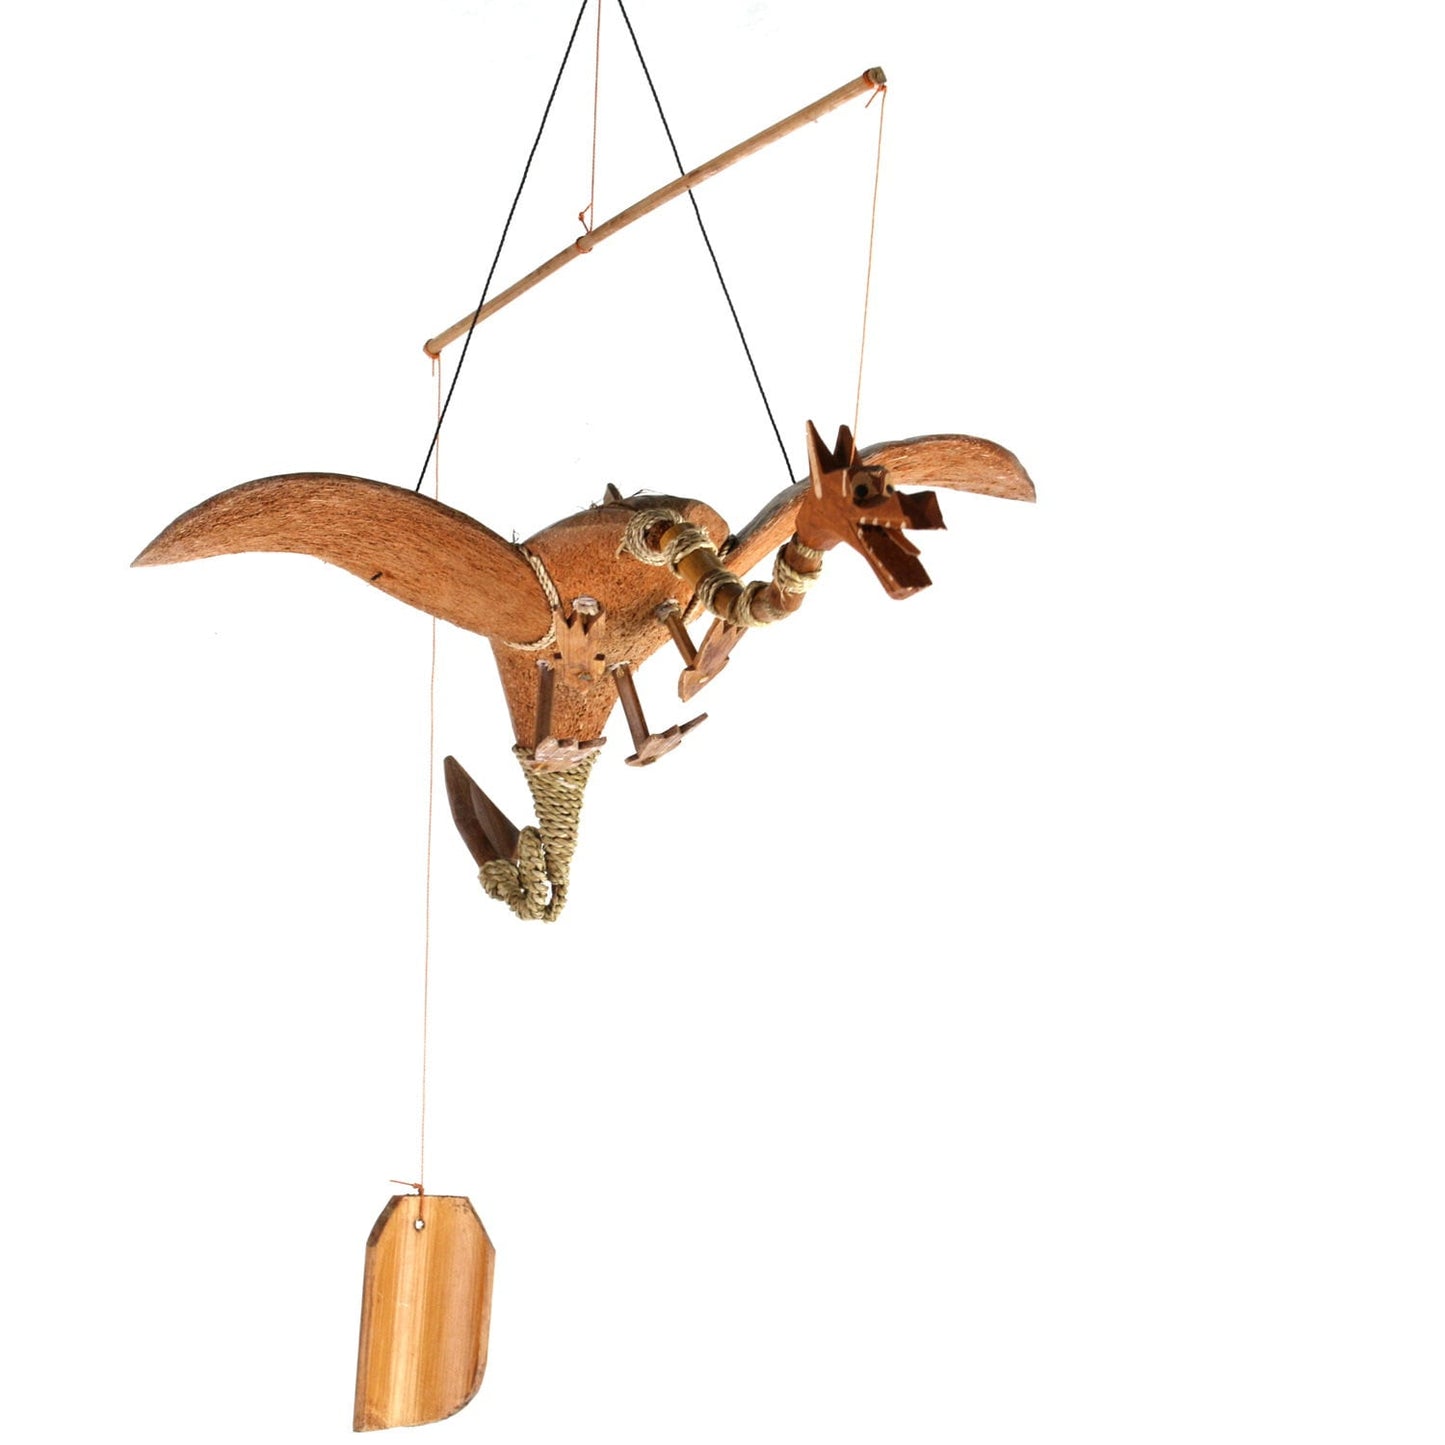 Wind chime mobile outdoor indoor kite made of coconut and bamboo